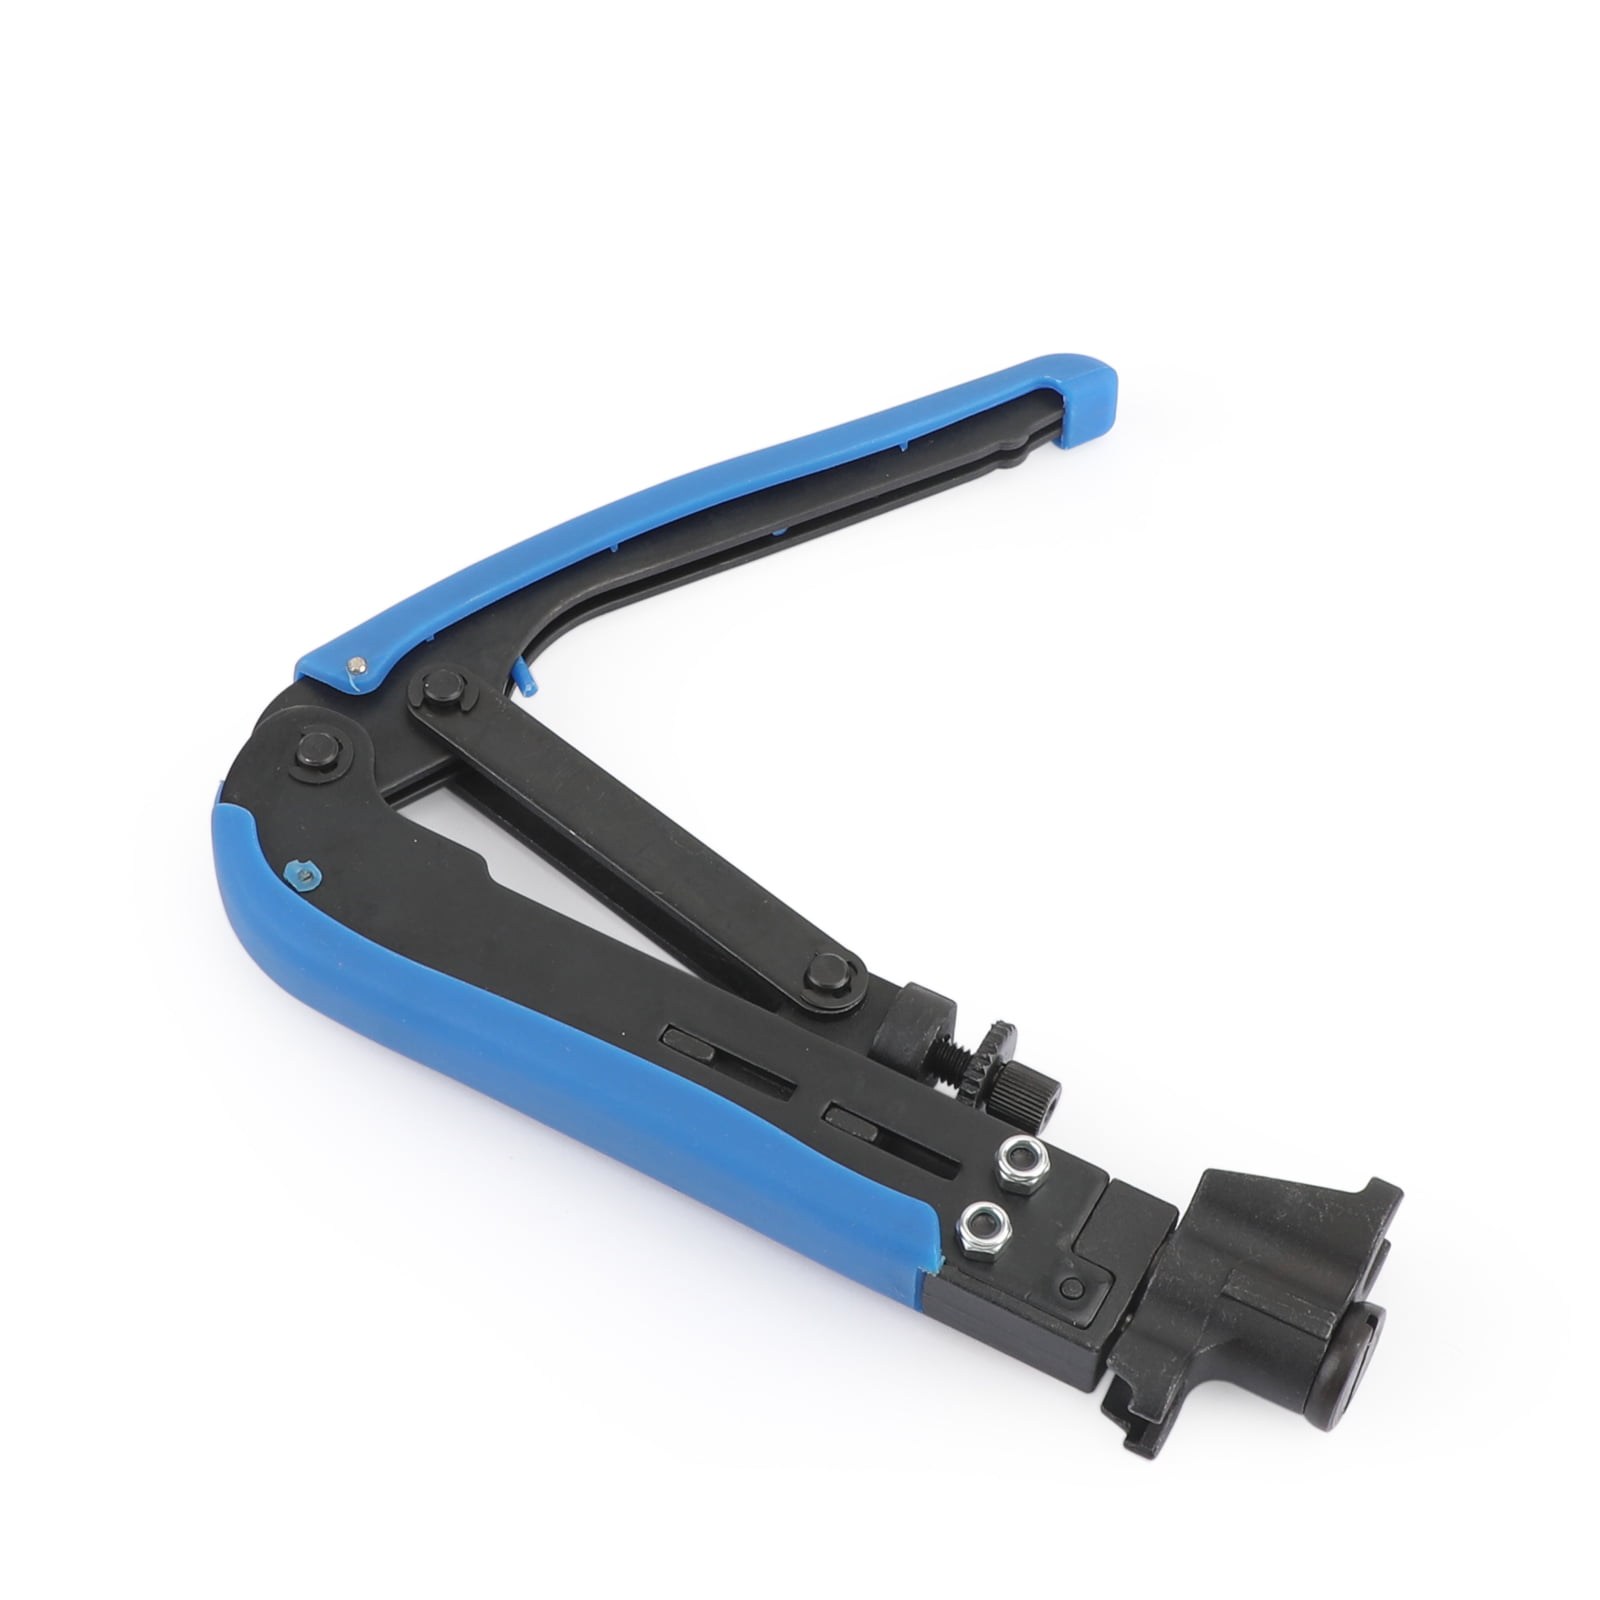 Coaxial Cable Crimper Compression Tool for RG6 RG11 RG59 RG7 F-type Connect 